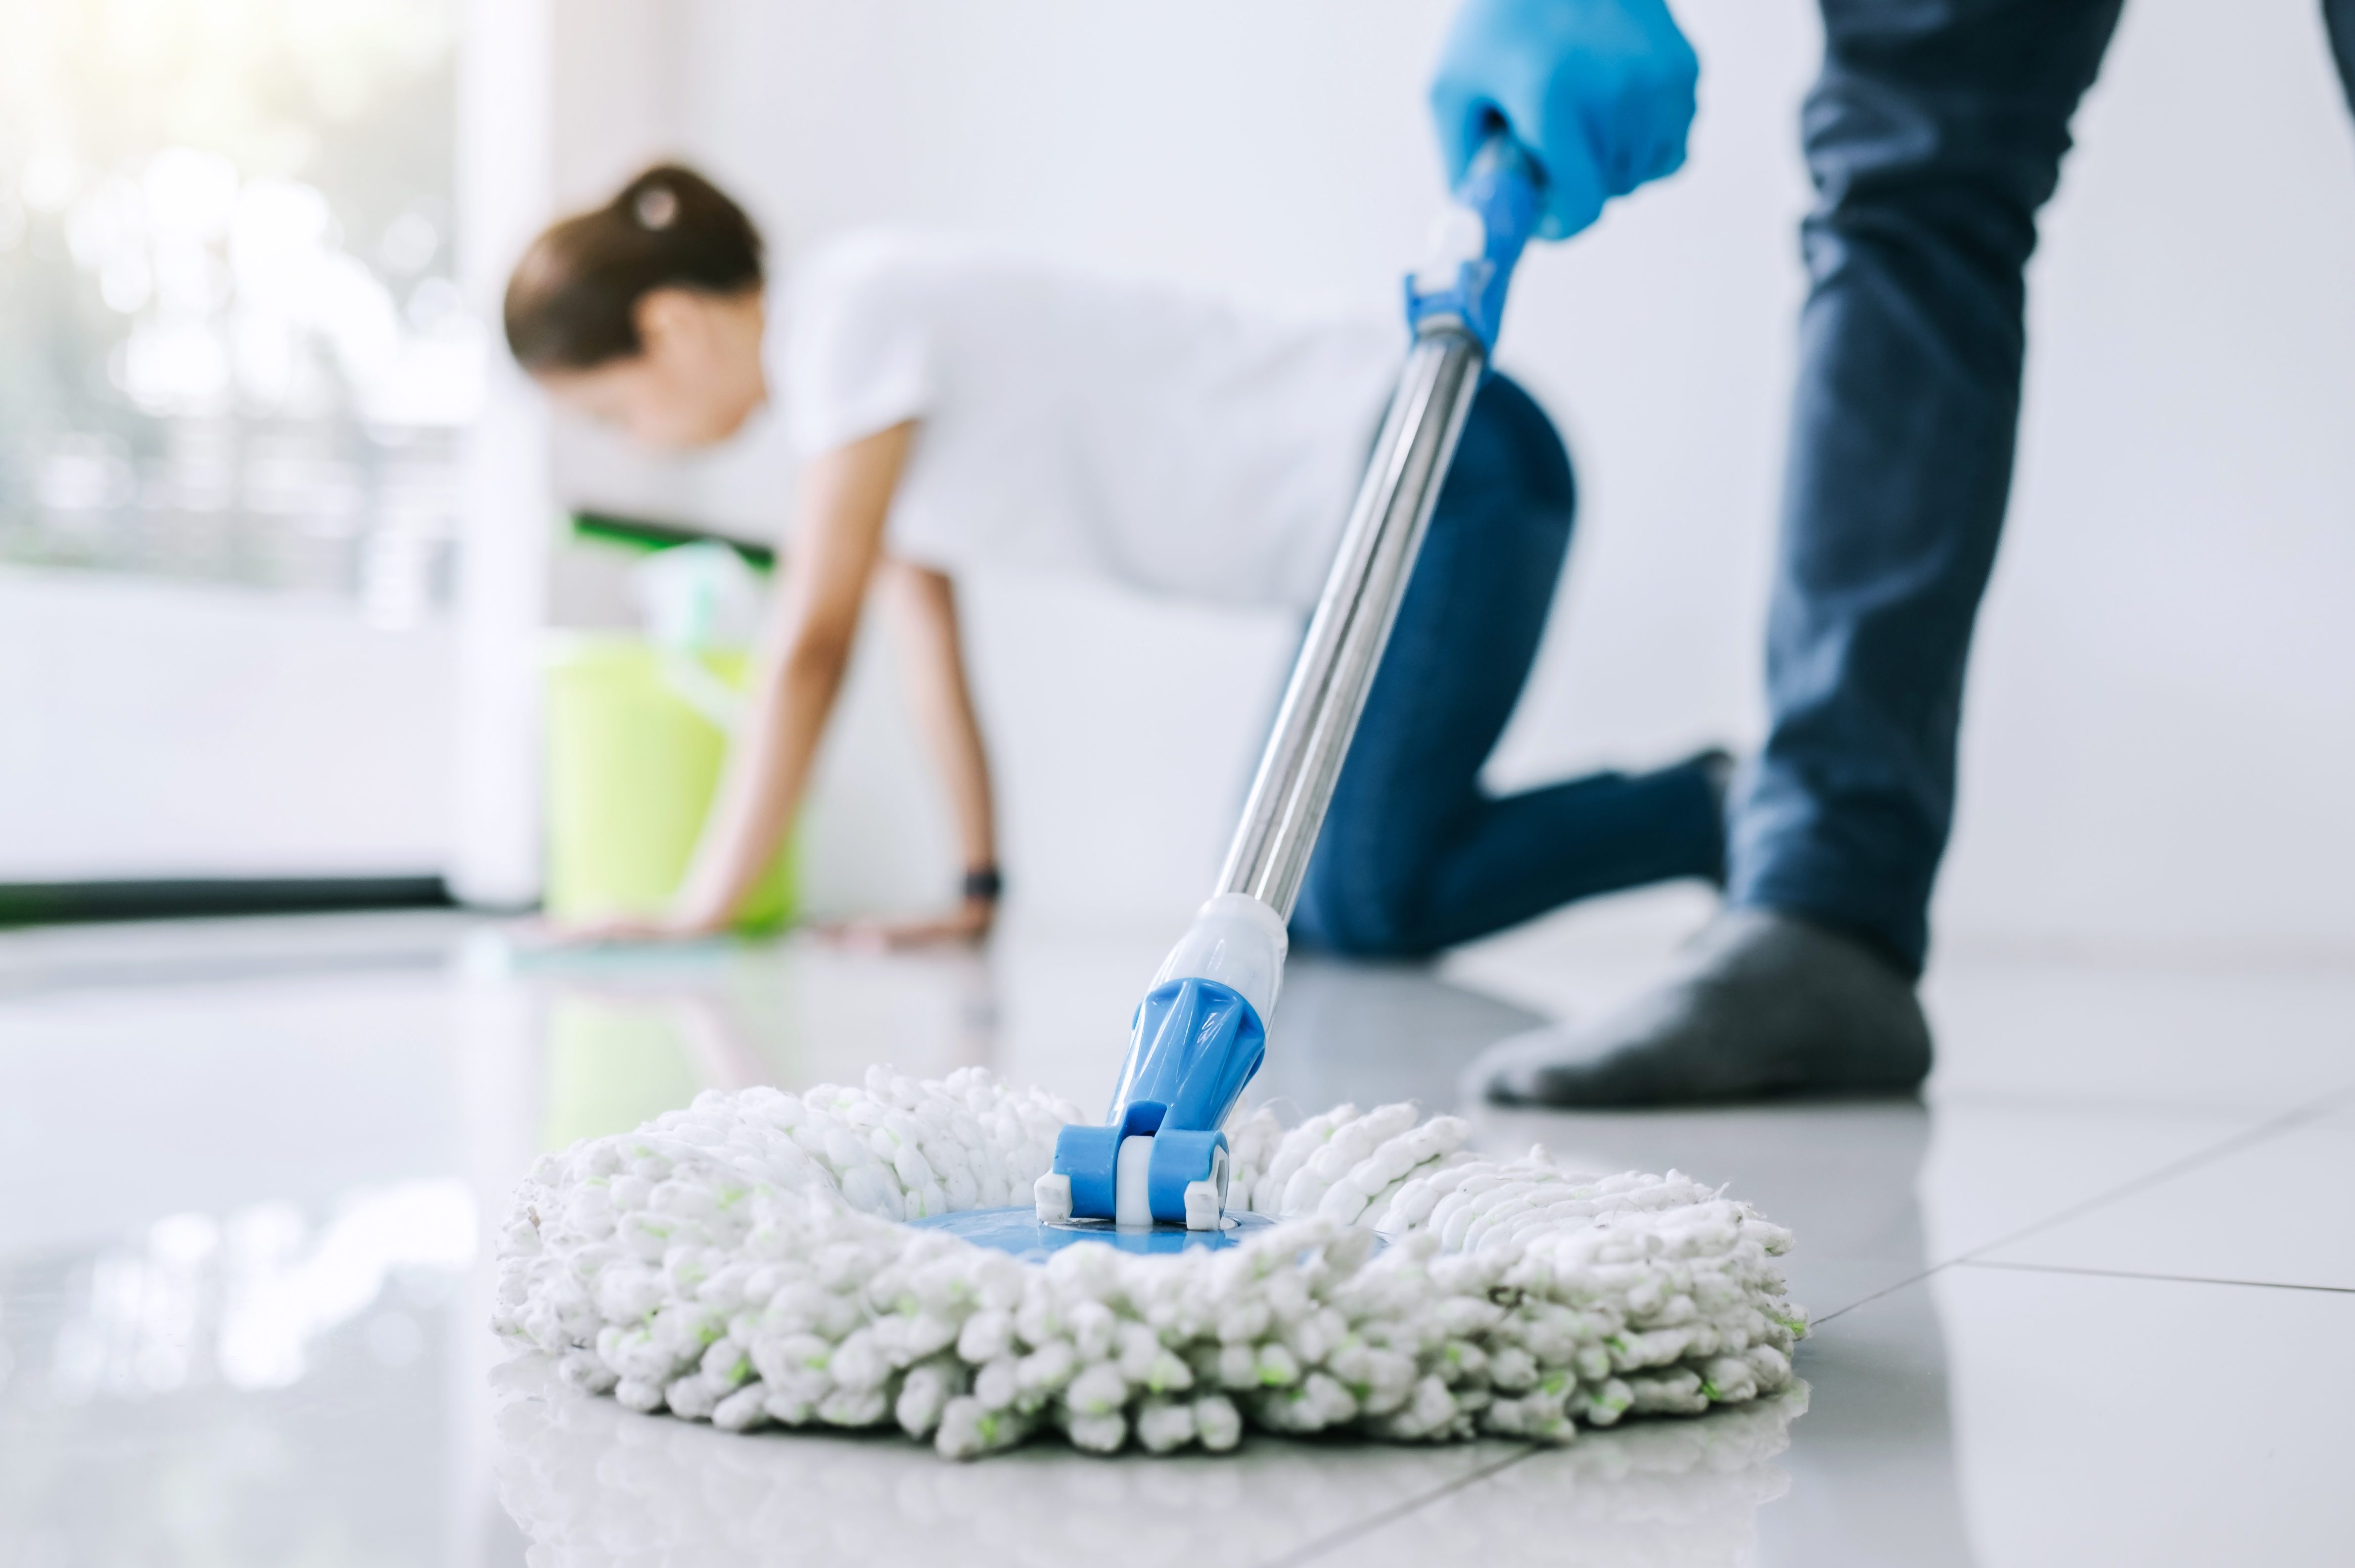 Close up man use a mop to mop the floor. Concept, household chore in daily  life. Hygienic and sanitary. Mop the dust, wipe the floor. Cleaning house.  Maintaining tile floors to be